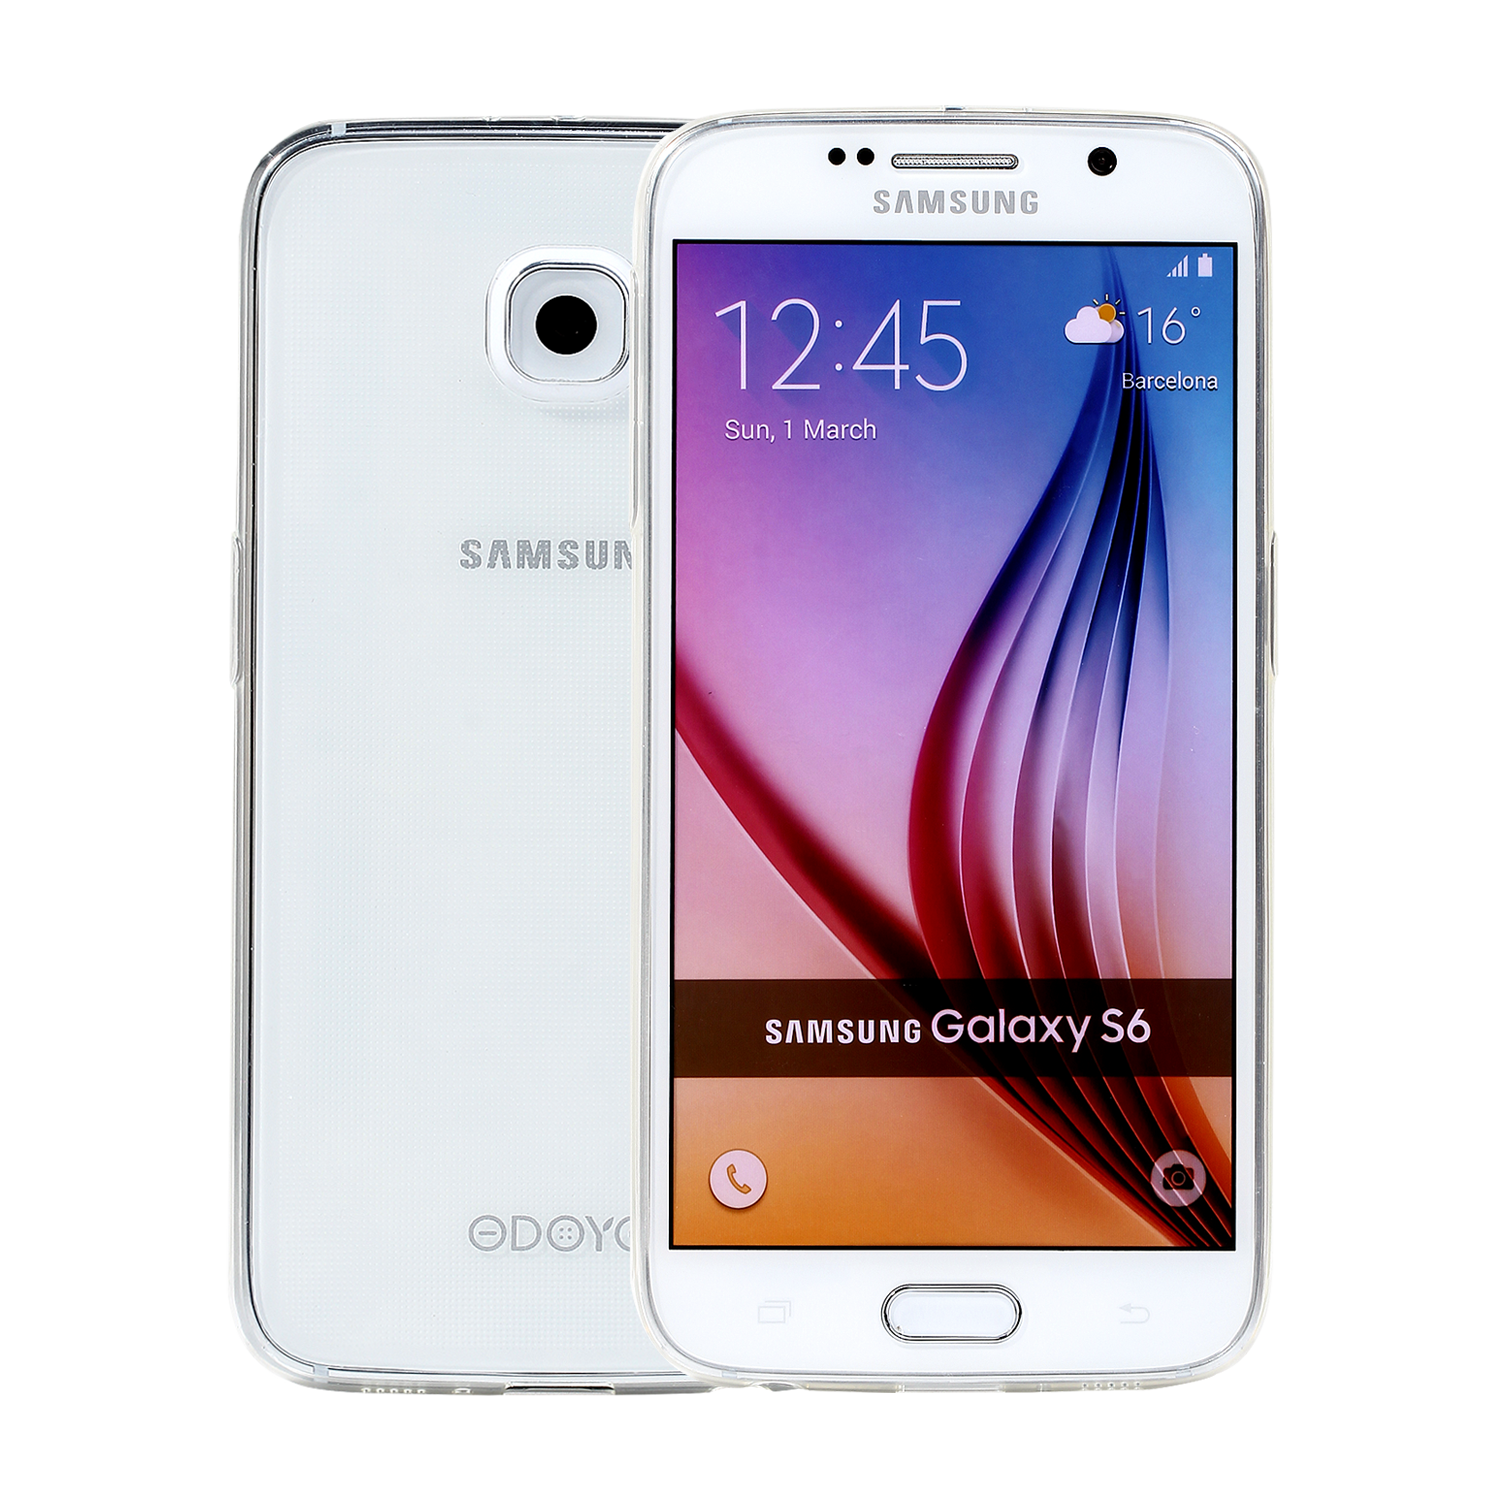 Samsung Galaxy S6 White PNG Image.